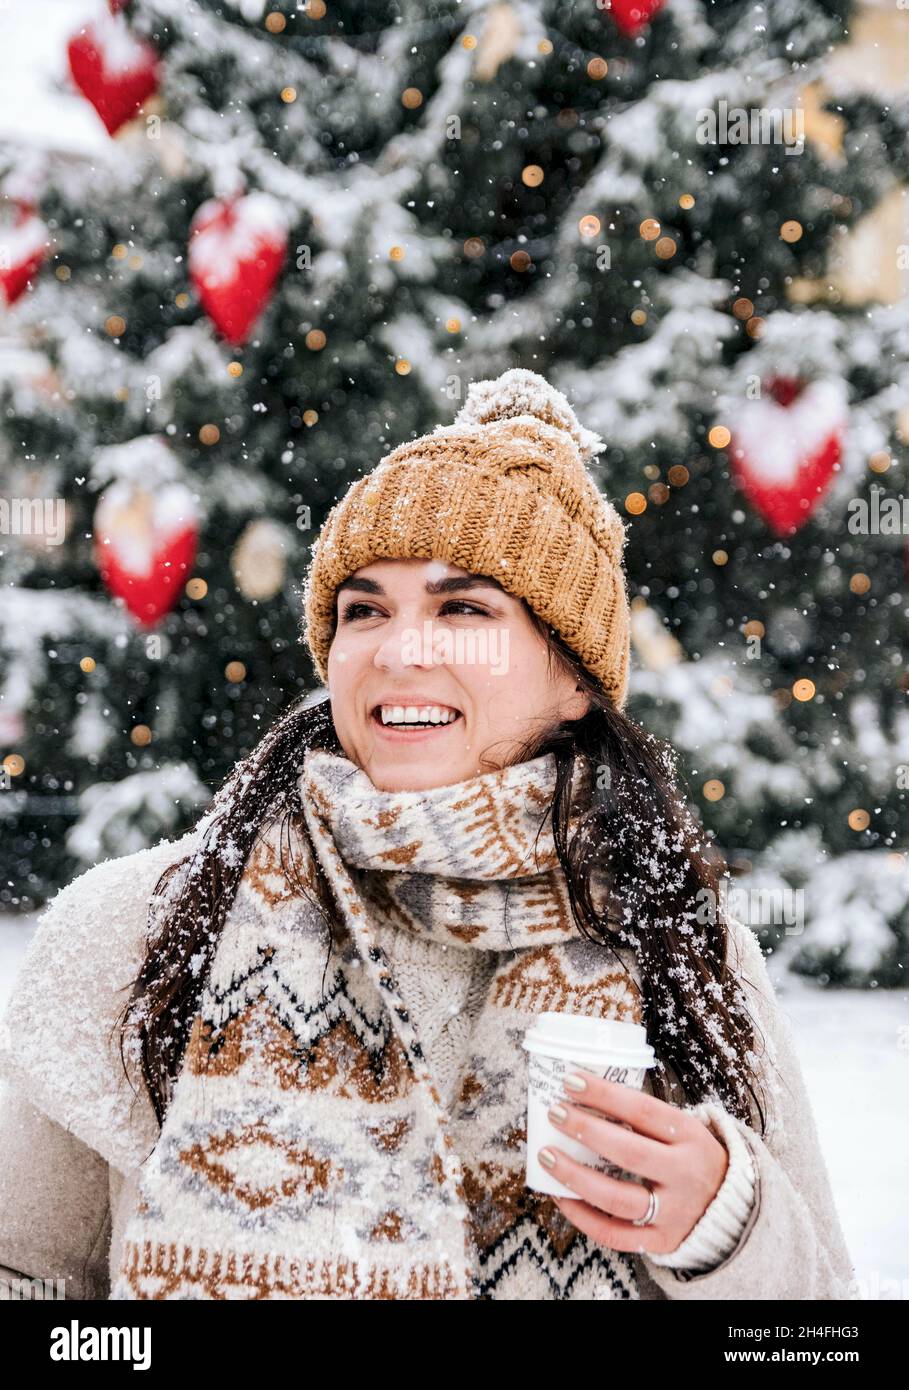 Outdoor Fashion Portrait of Pretty Young Girl in Winter Stock Image - Image  of human, attractive: 35907789